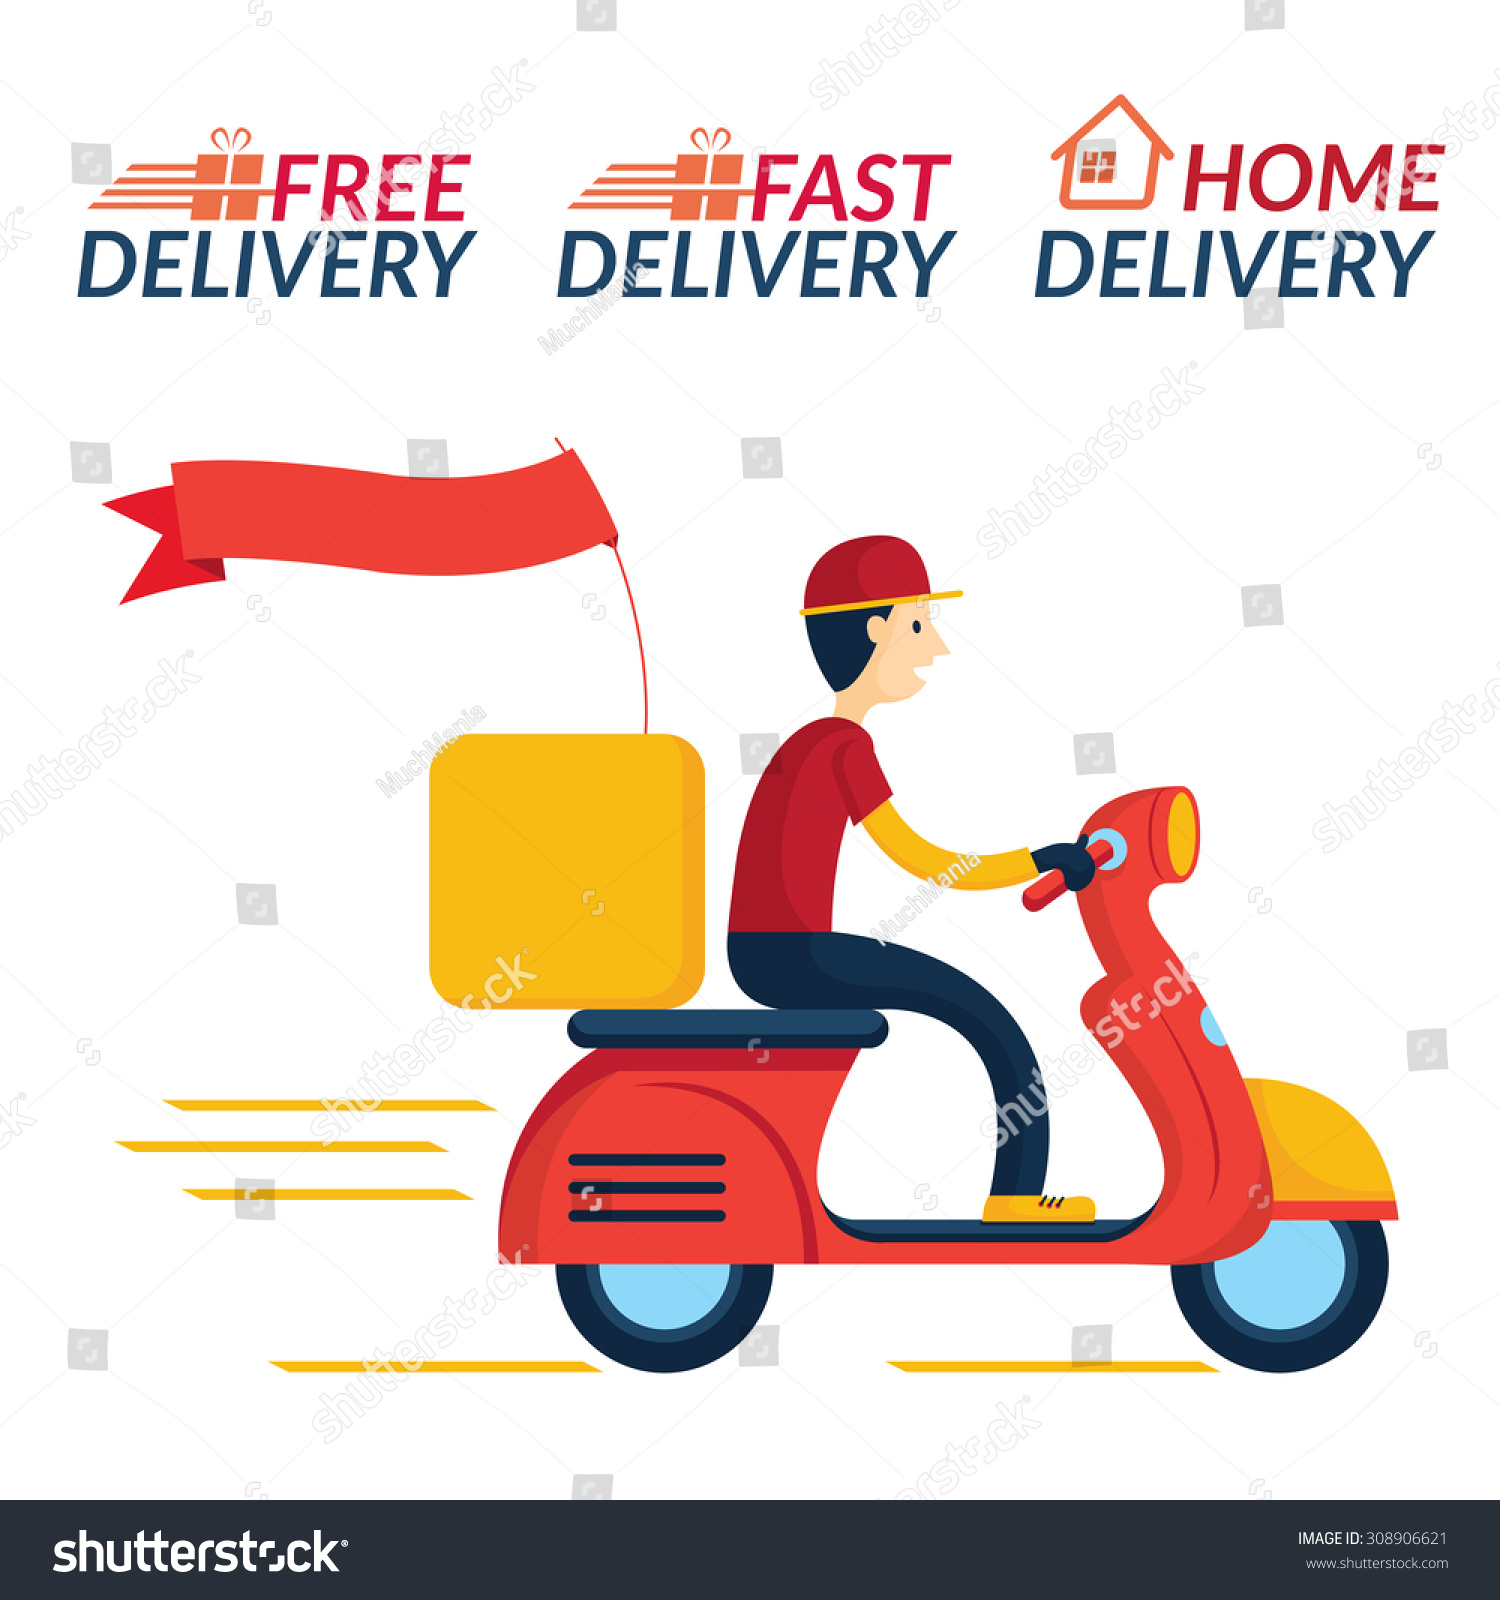 delivery clipart free - photo #43